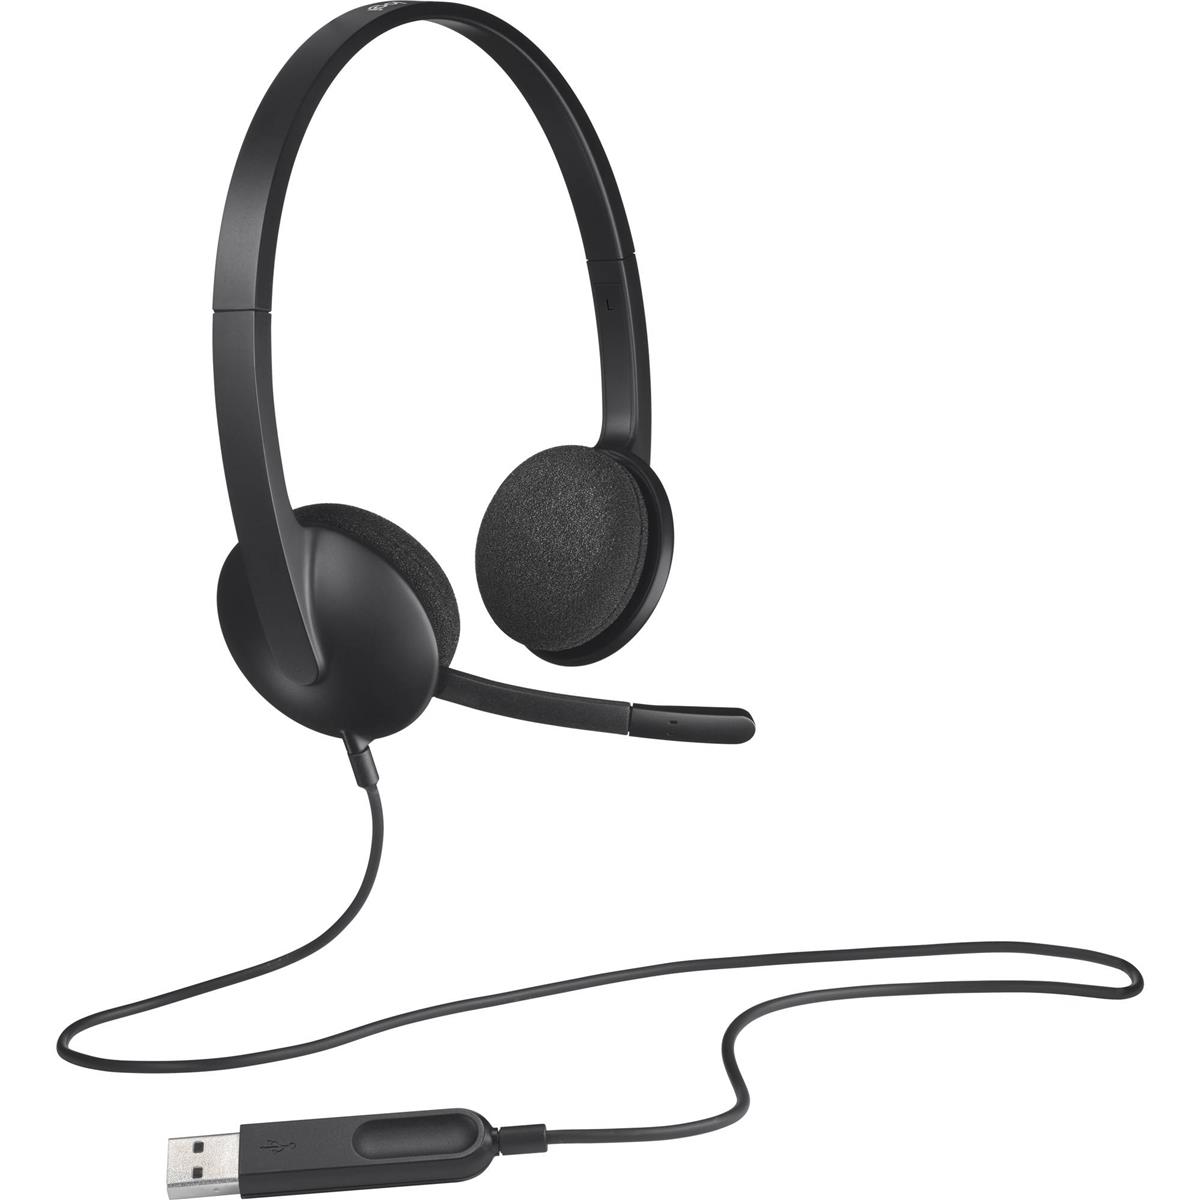 Image of Logitech H340 USB Computer Headset with Microphone